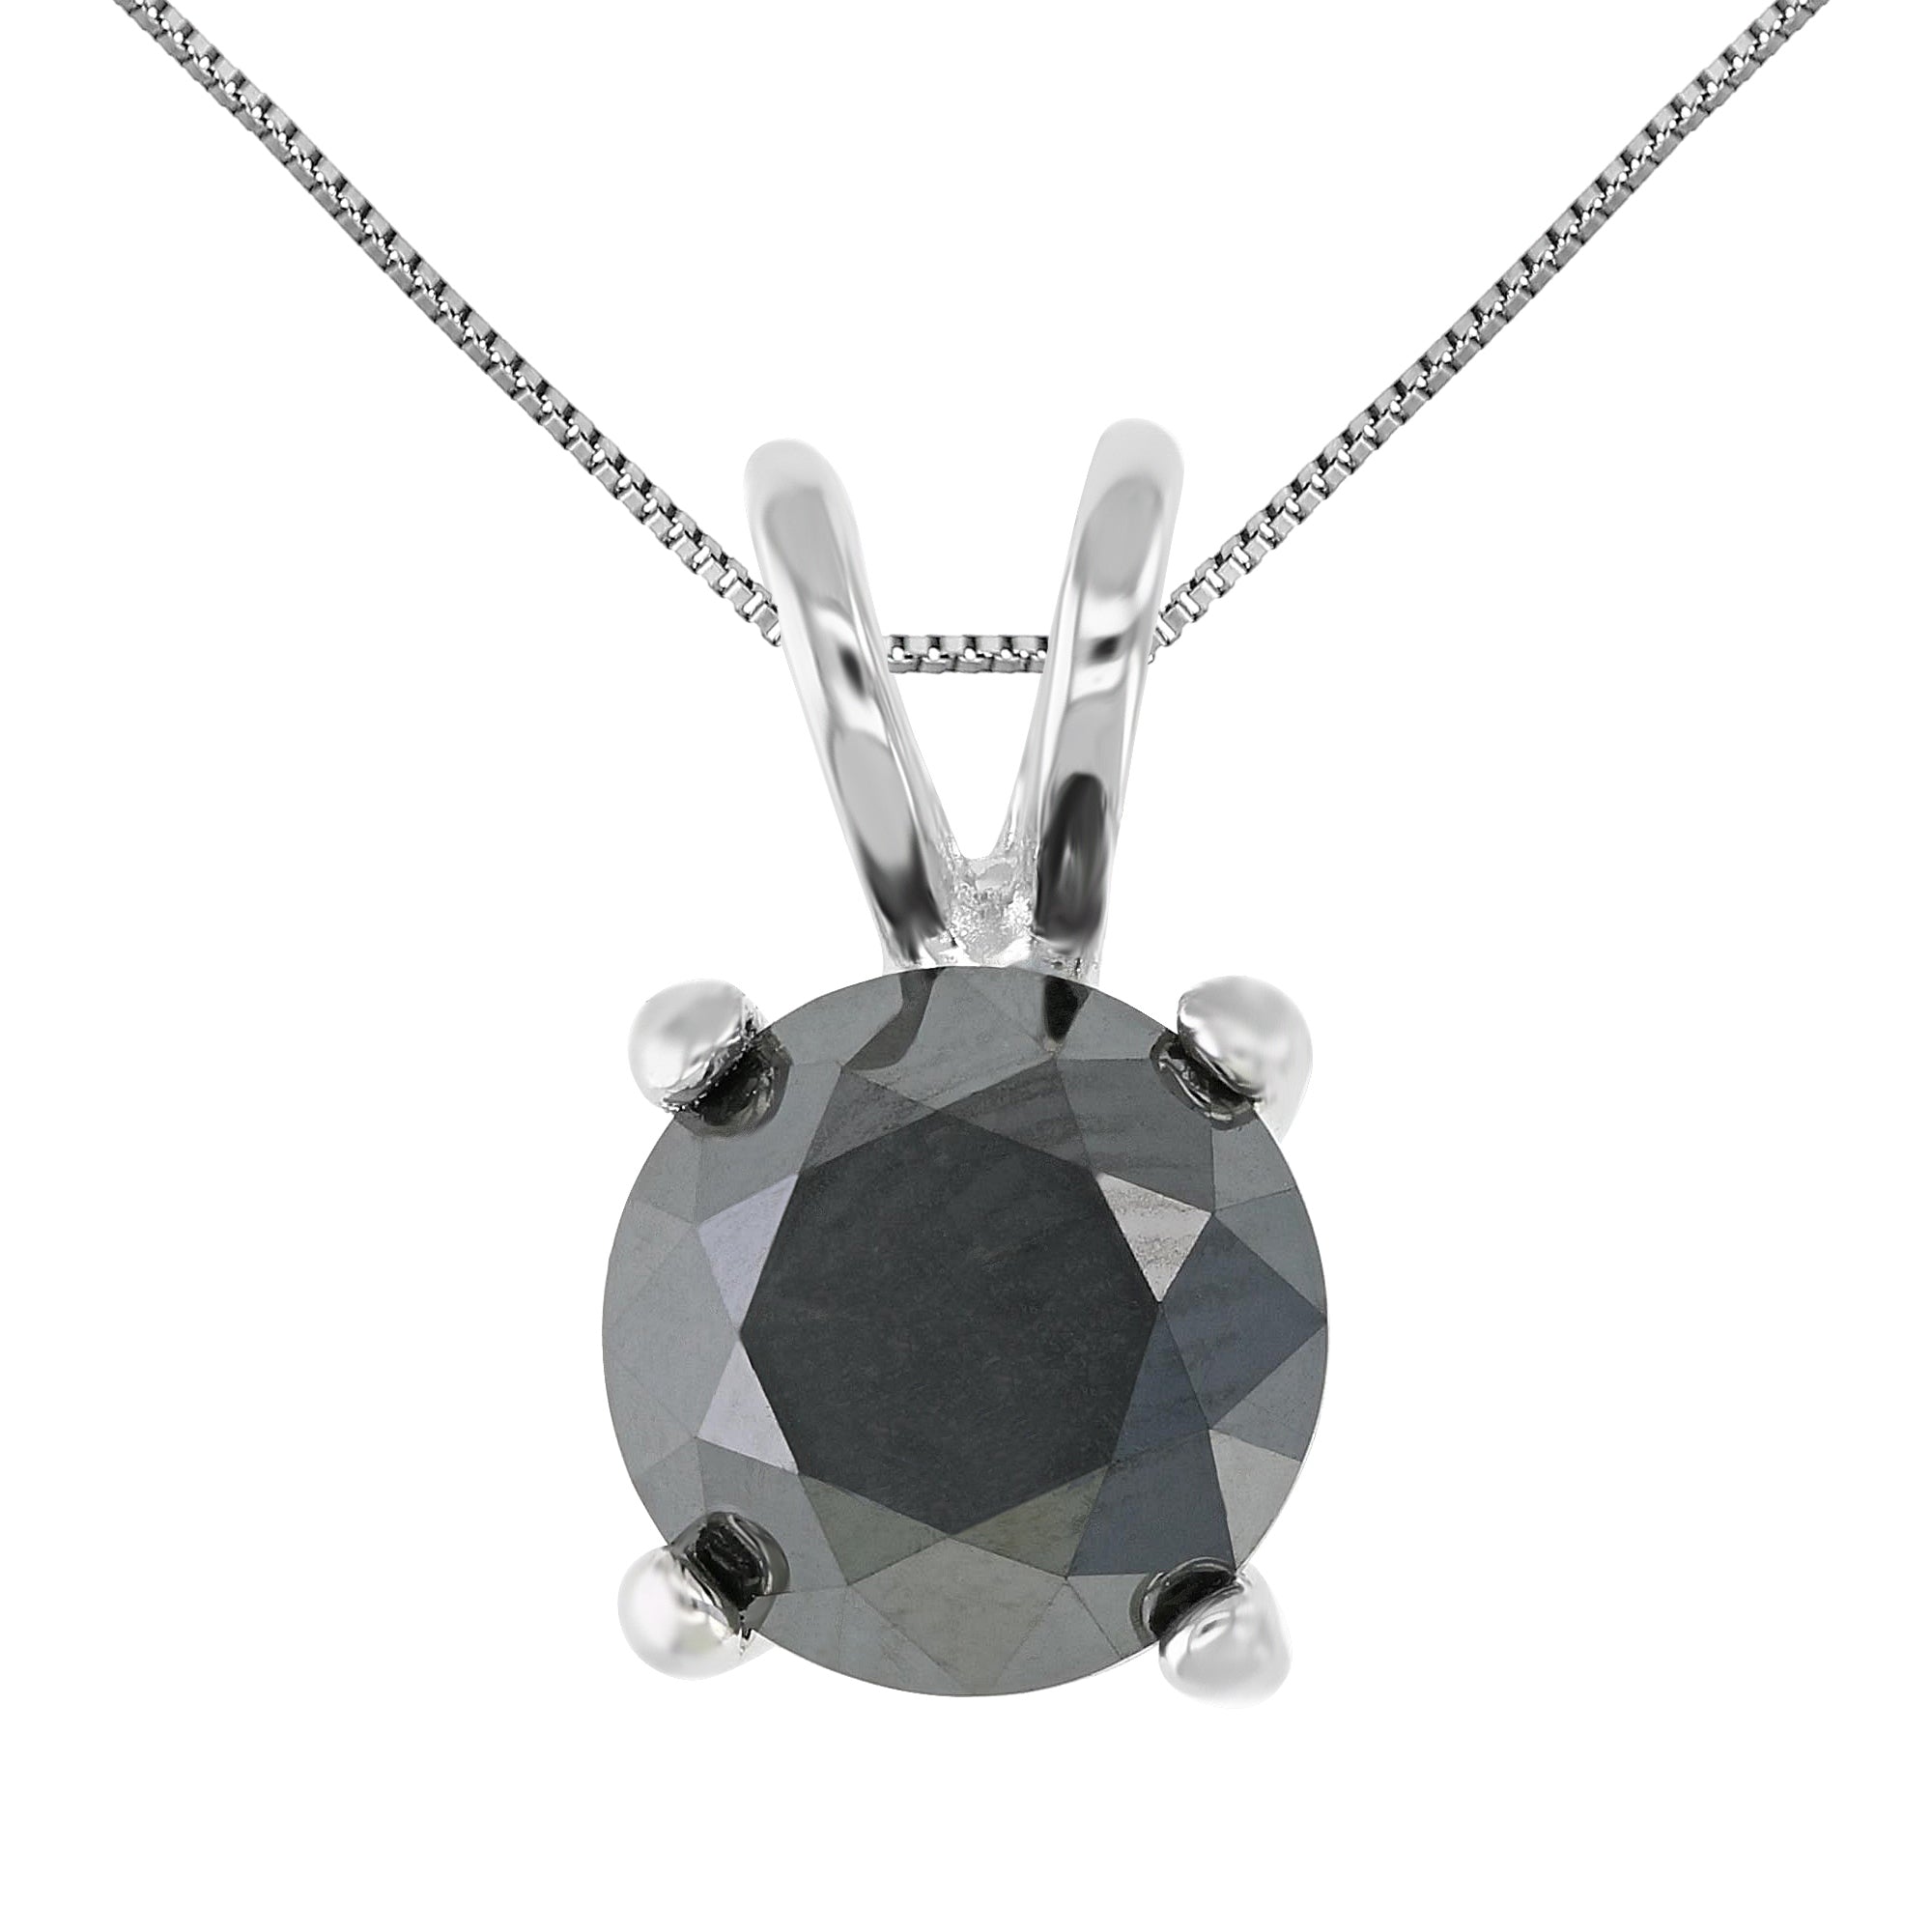 4 cttw Diamond Pendant, Black Diamond Solitaire Pendant Necklace for Women in .925 Sterling Silver with Rhodium, 18 Inch Chain, Prong Setting